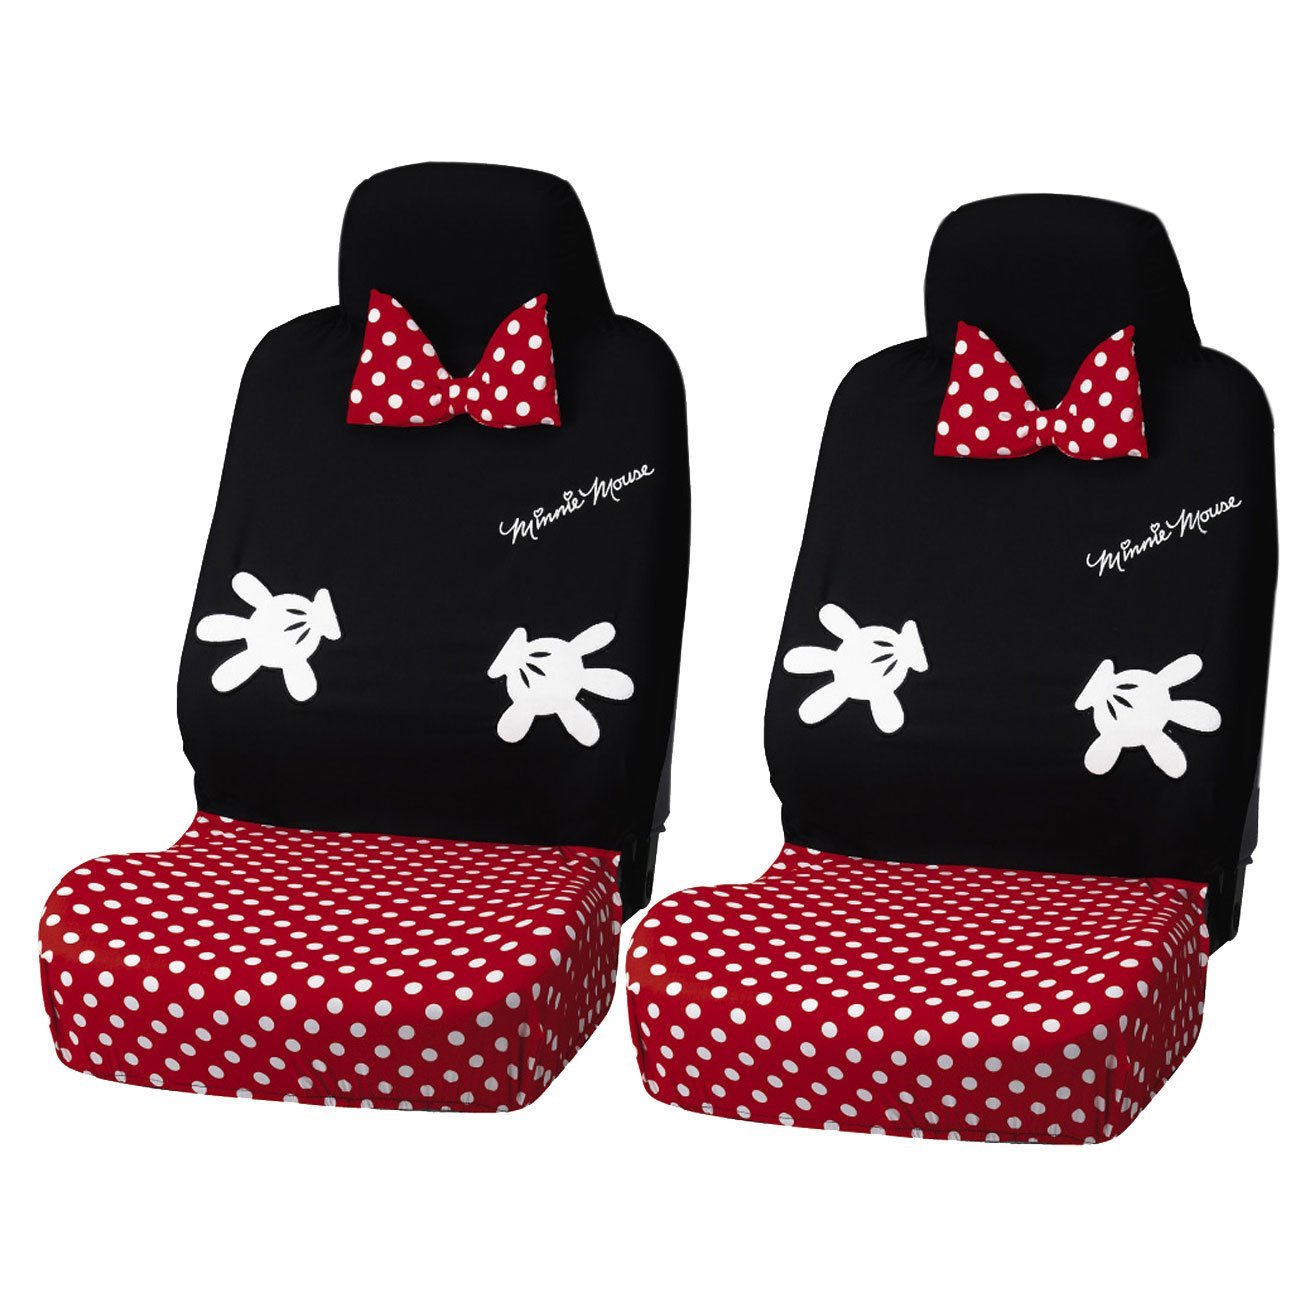 Absolutely Lovely Minnie Seat Covers For a Disney Themed Car